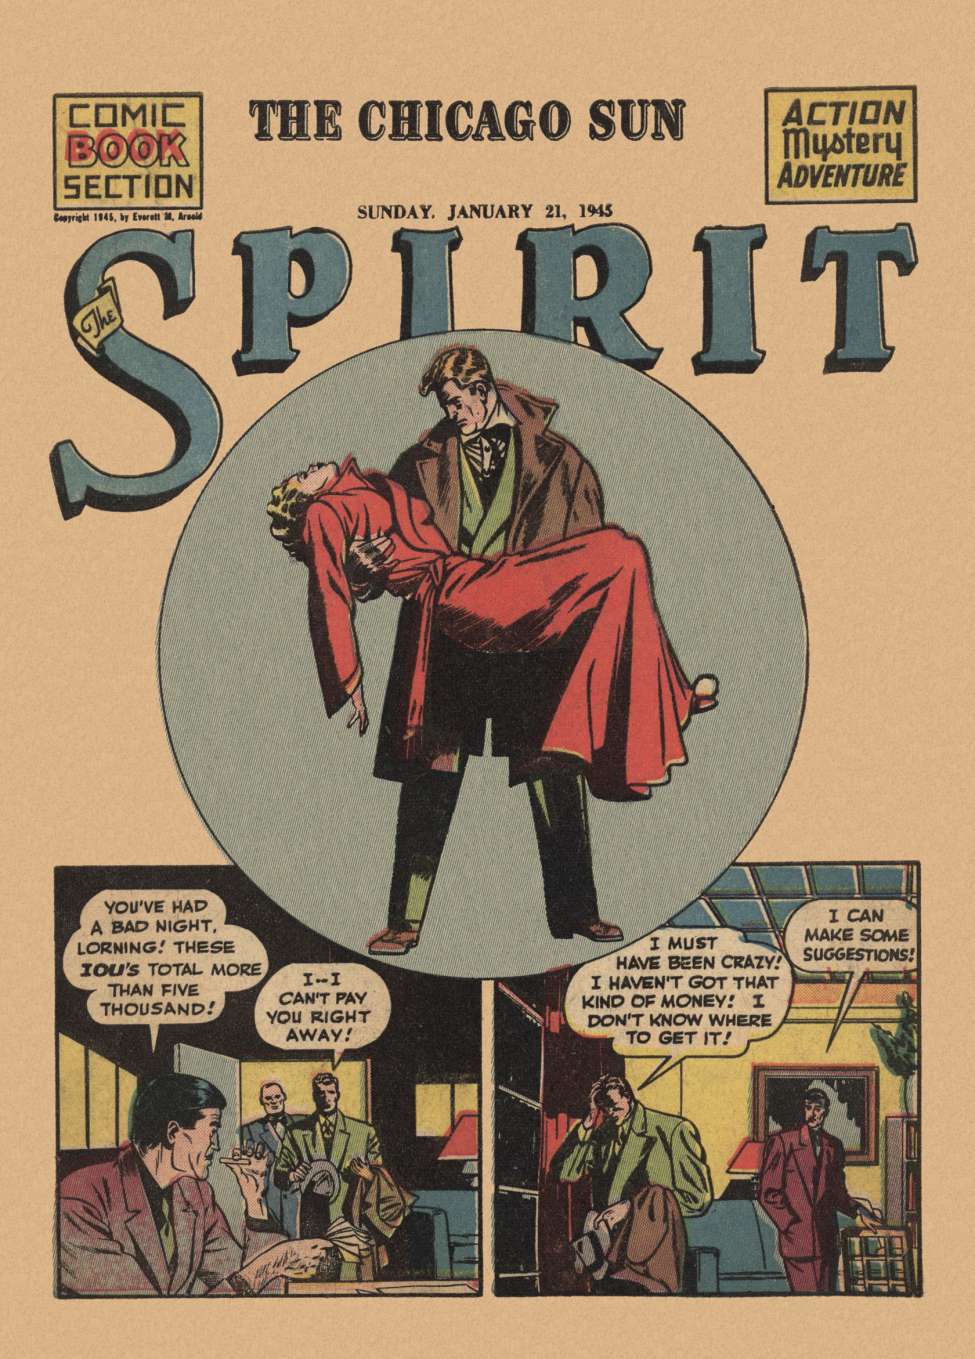 Comic Book Cover For The Spirit (1945-01-21) - Chicago Sun